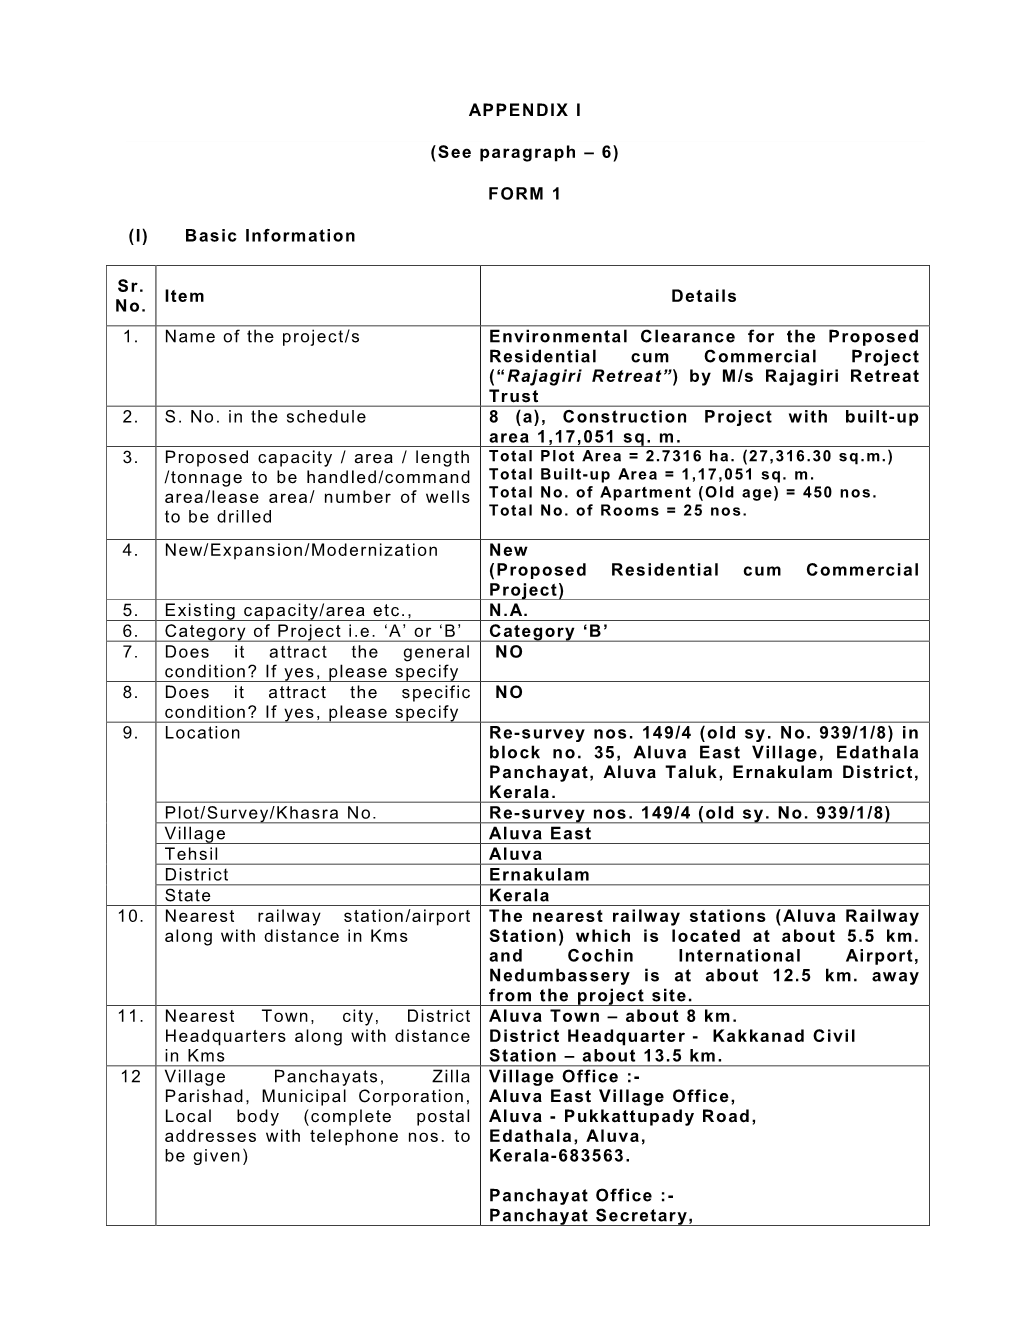 APPENDIX I (See Paragraph – 6) FORM 1 (I) Basic Information Sr. No. Item Details 1. Name of the Project/S Environmental Clear